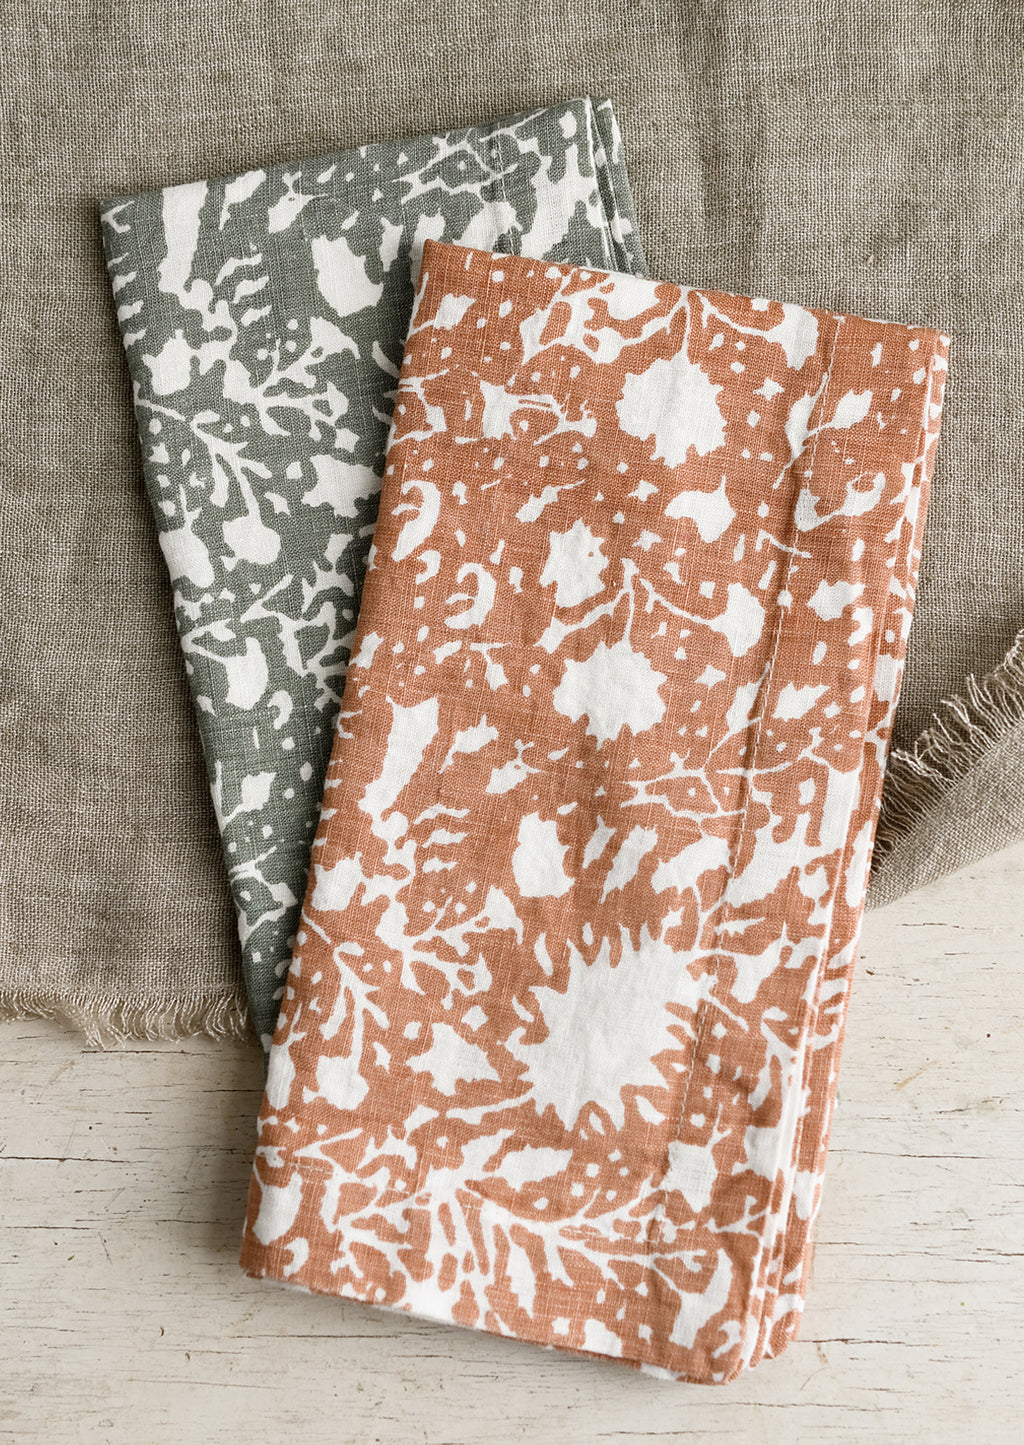 4: Botanical print linen napkins in two colorways.